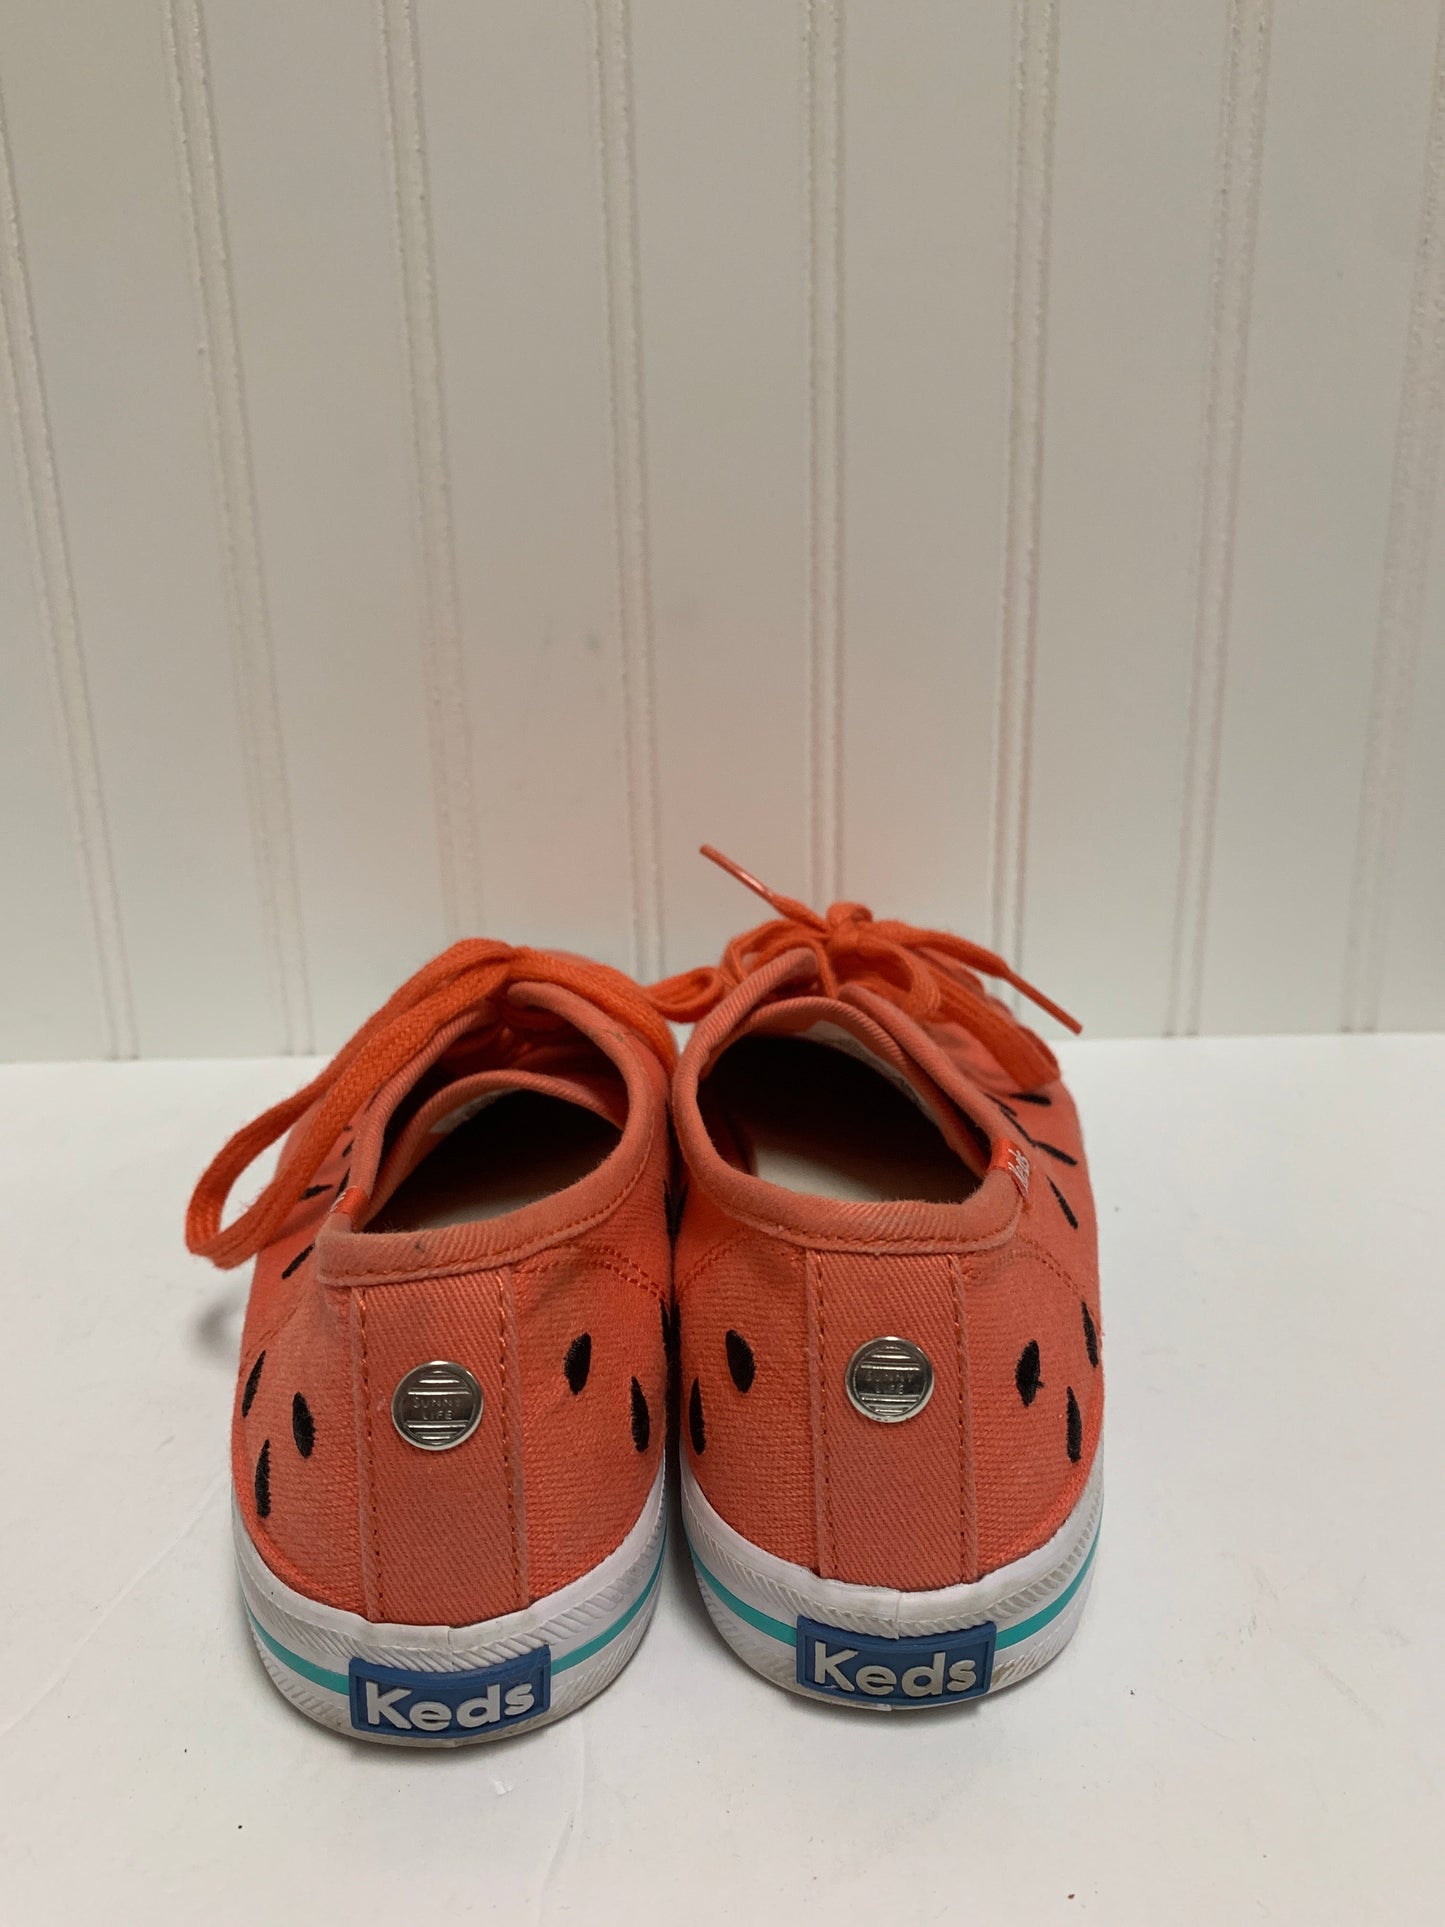 Shoes Sneakers By Keds  Size: 6.5